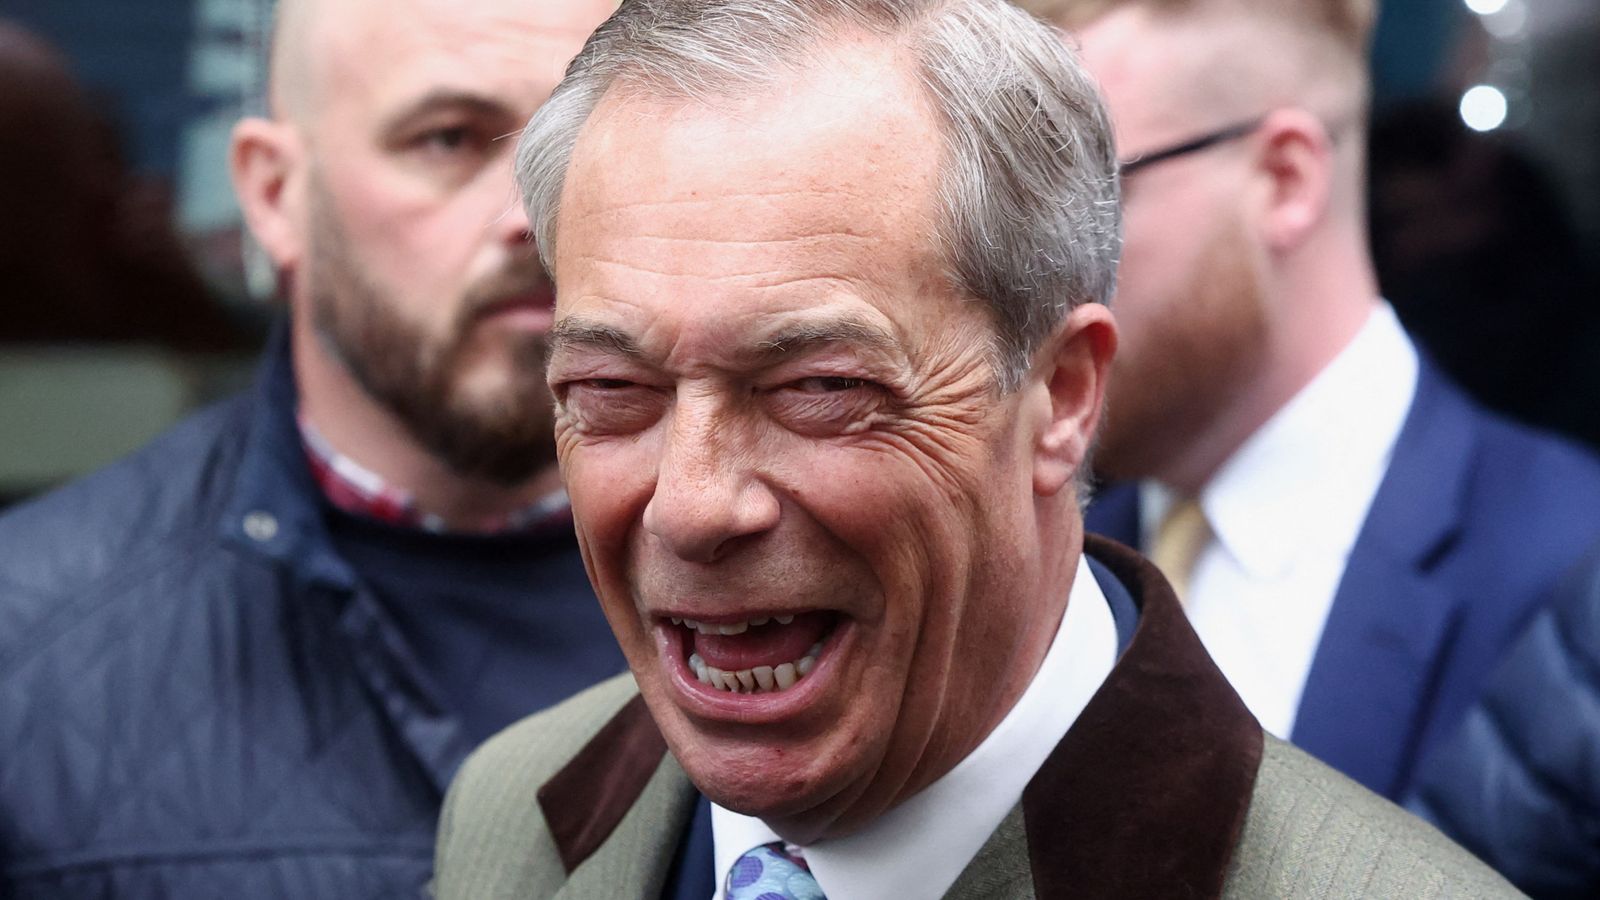 Nigel Farage will not be standing in the general election